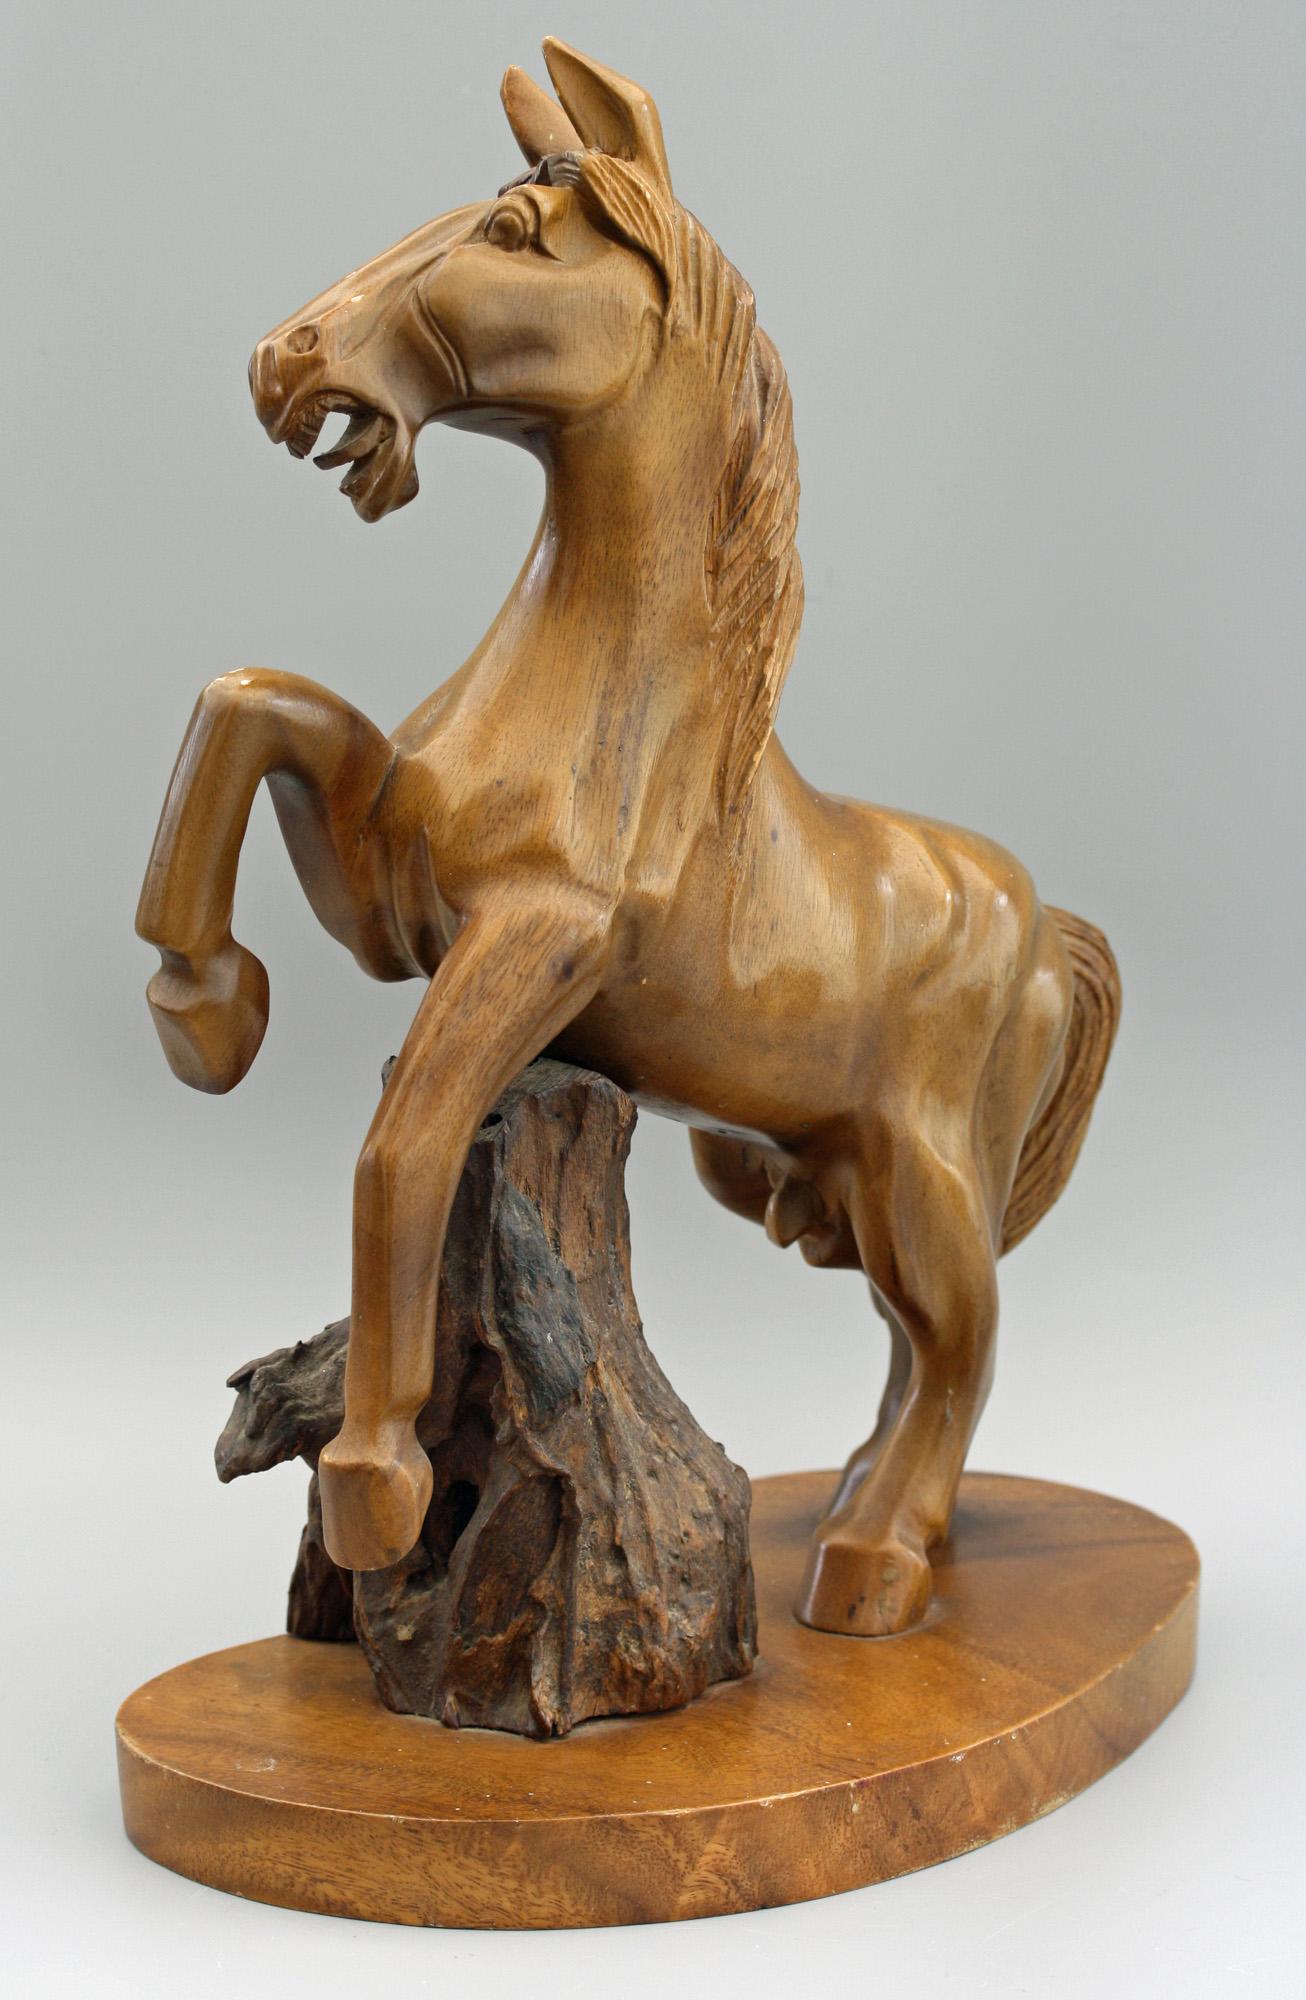 A vintage Chinese carved wooden figure of a rearing horse believed to date between 1950 and 1970. The horse originates from a family who were based in China and returned to England in the late 1970s and was acquired while living in China. The horse